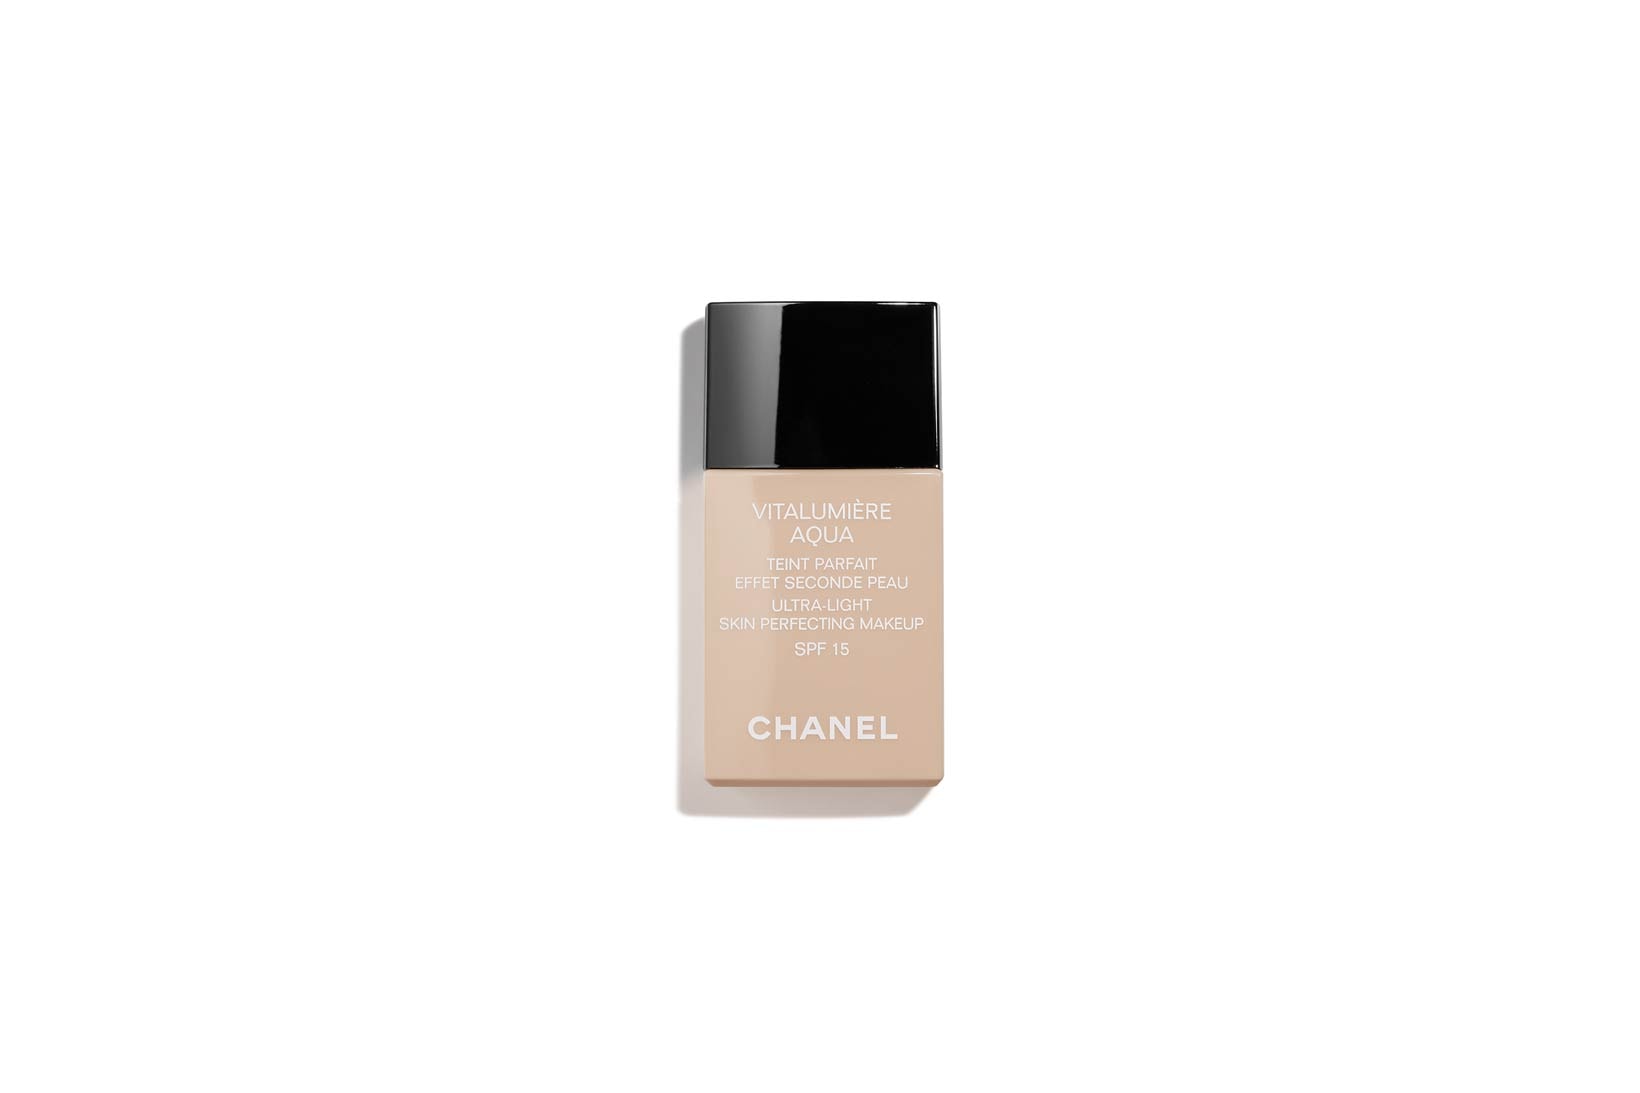 CHANEL VITALUMIÈRE GLOW Luminous Touch Foundation Hydaration and Comfort  Cushion SPF 15 - Reviews